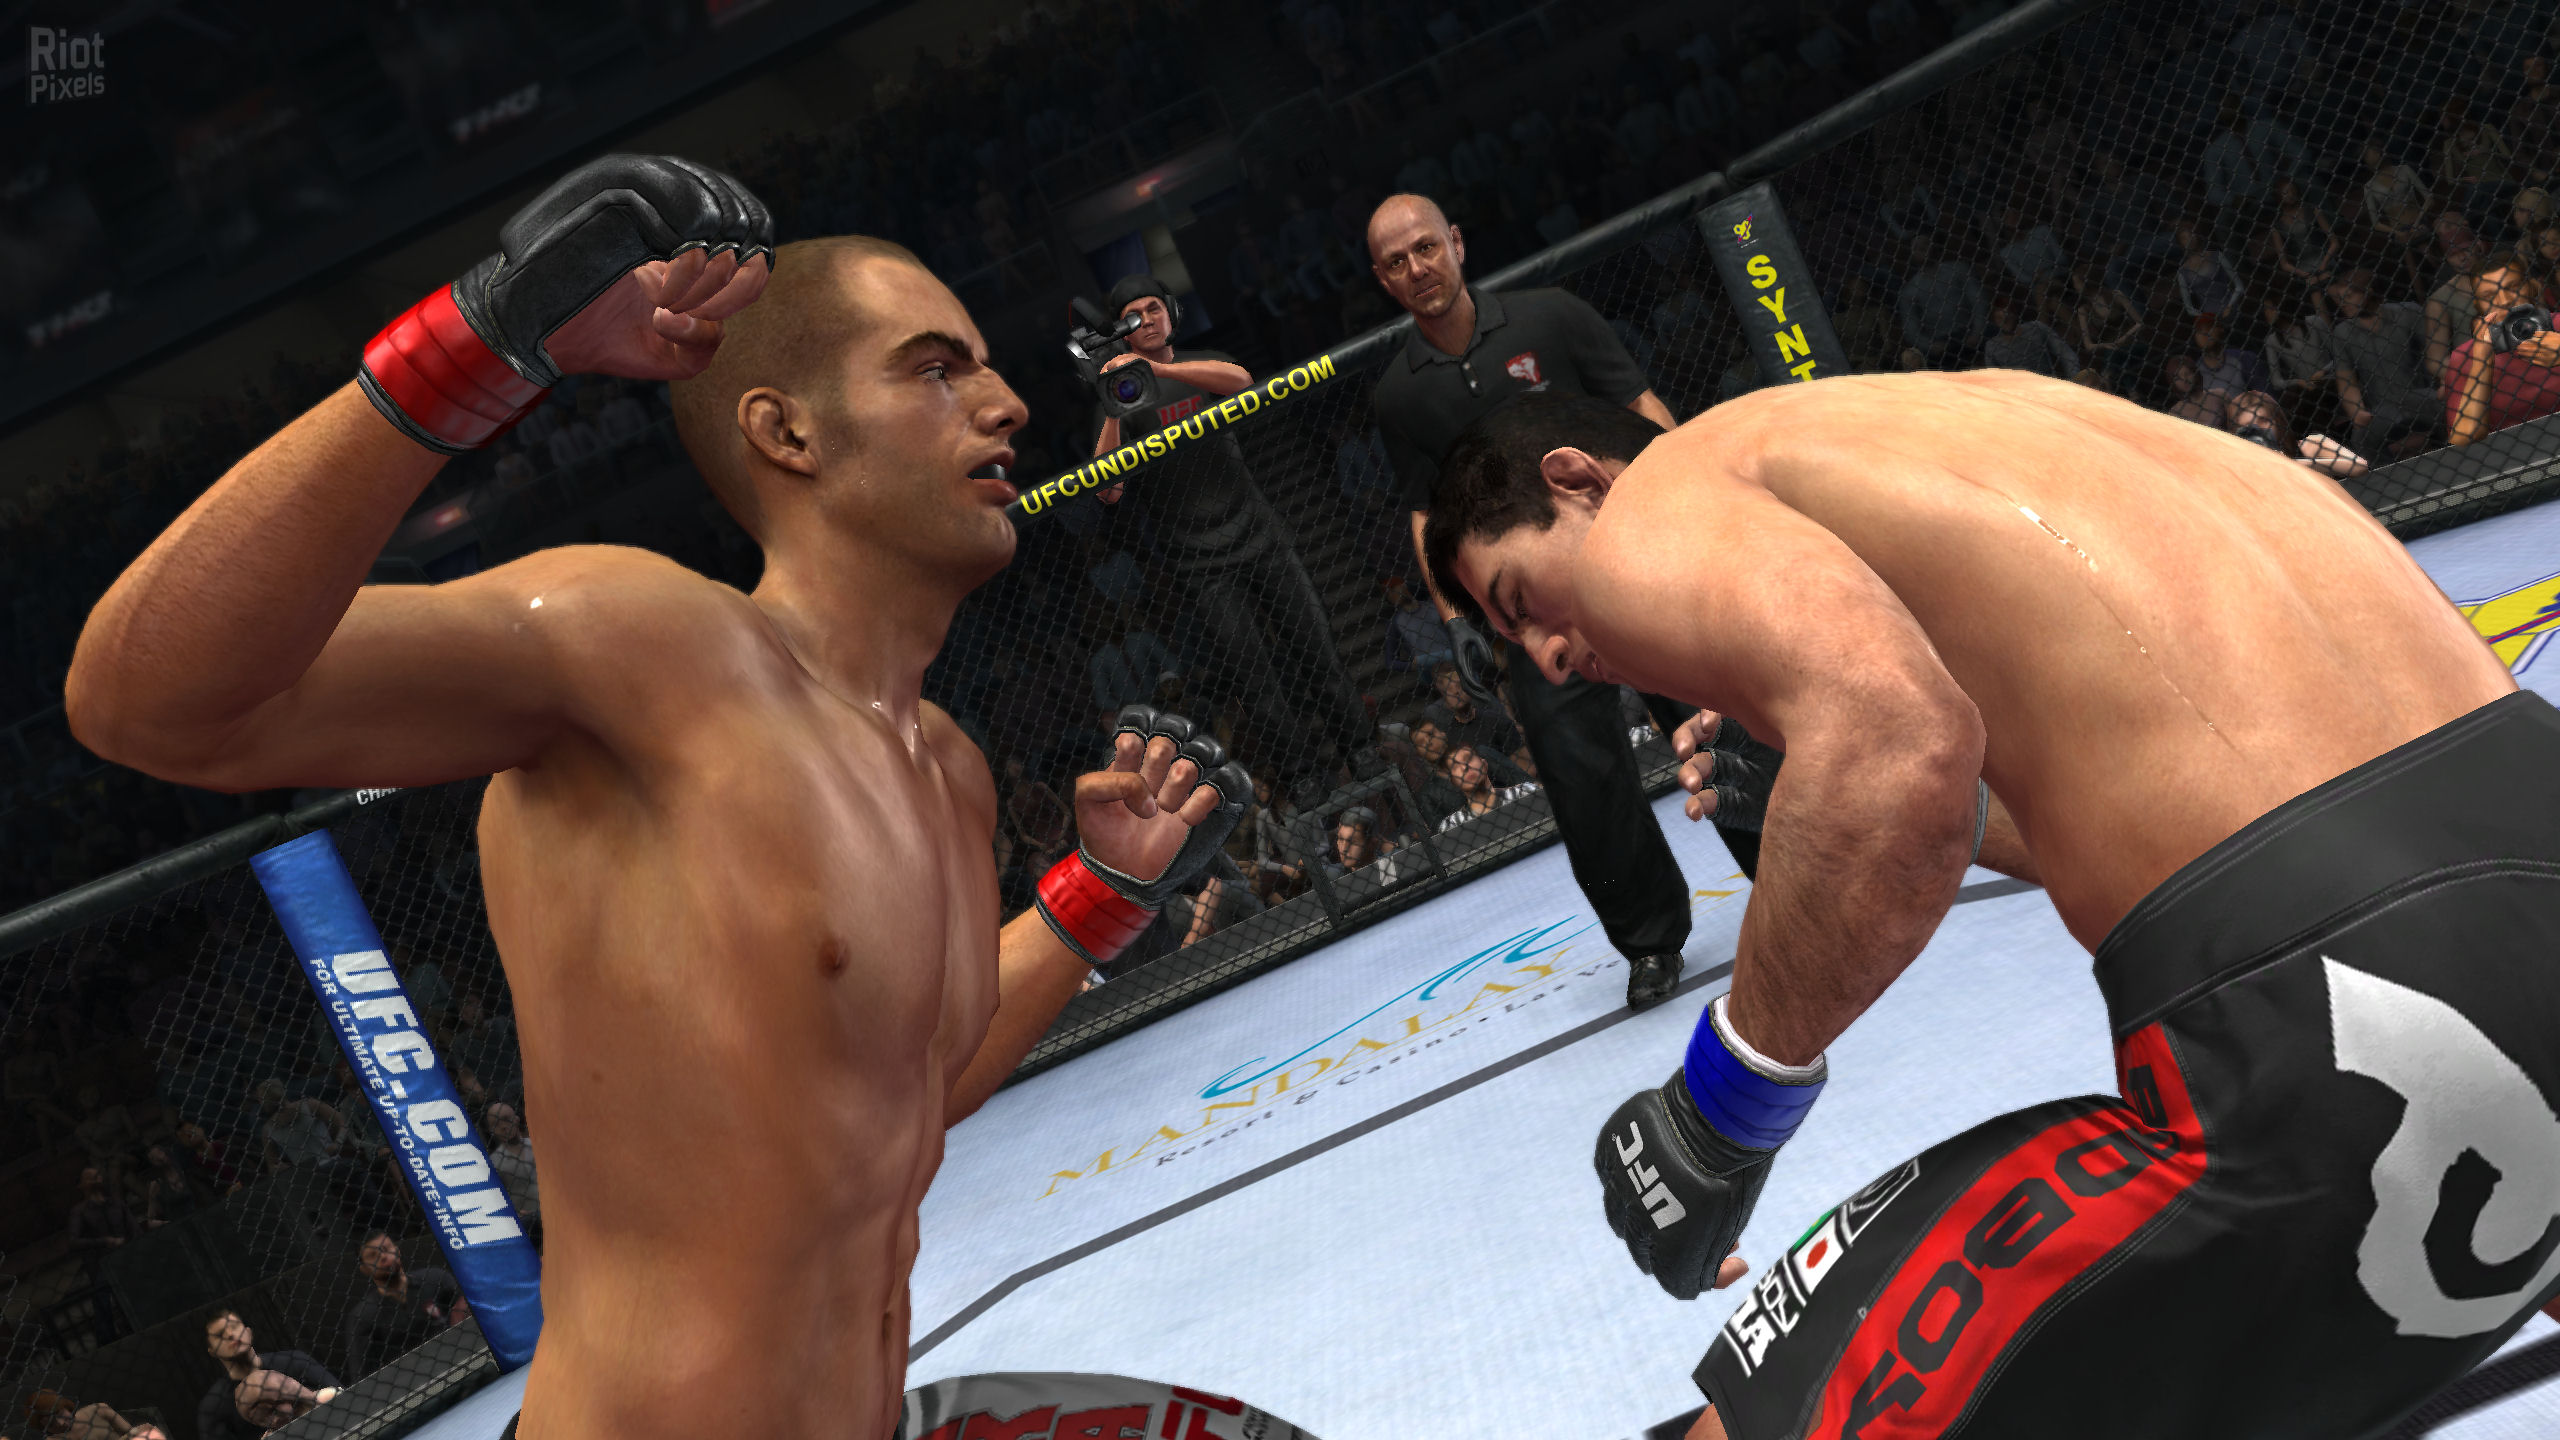 download ufc game for pc